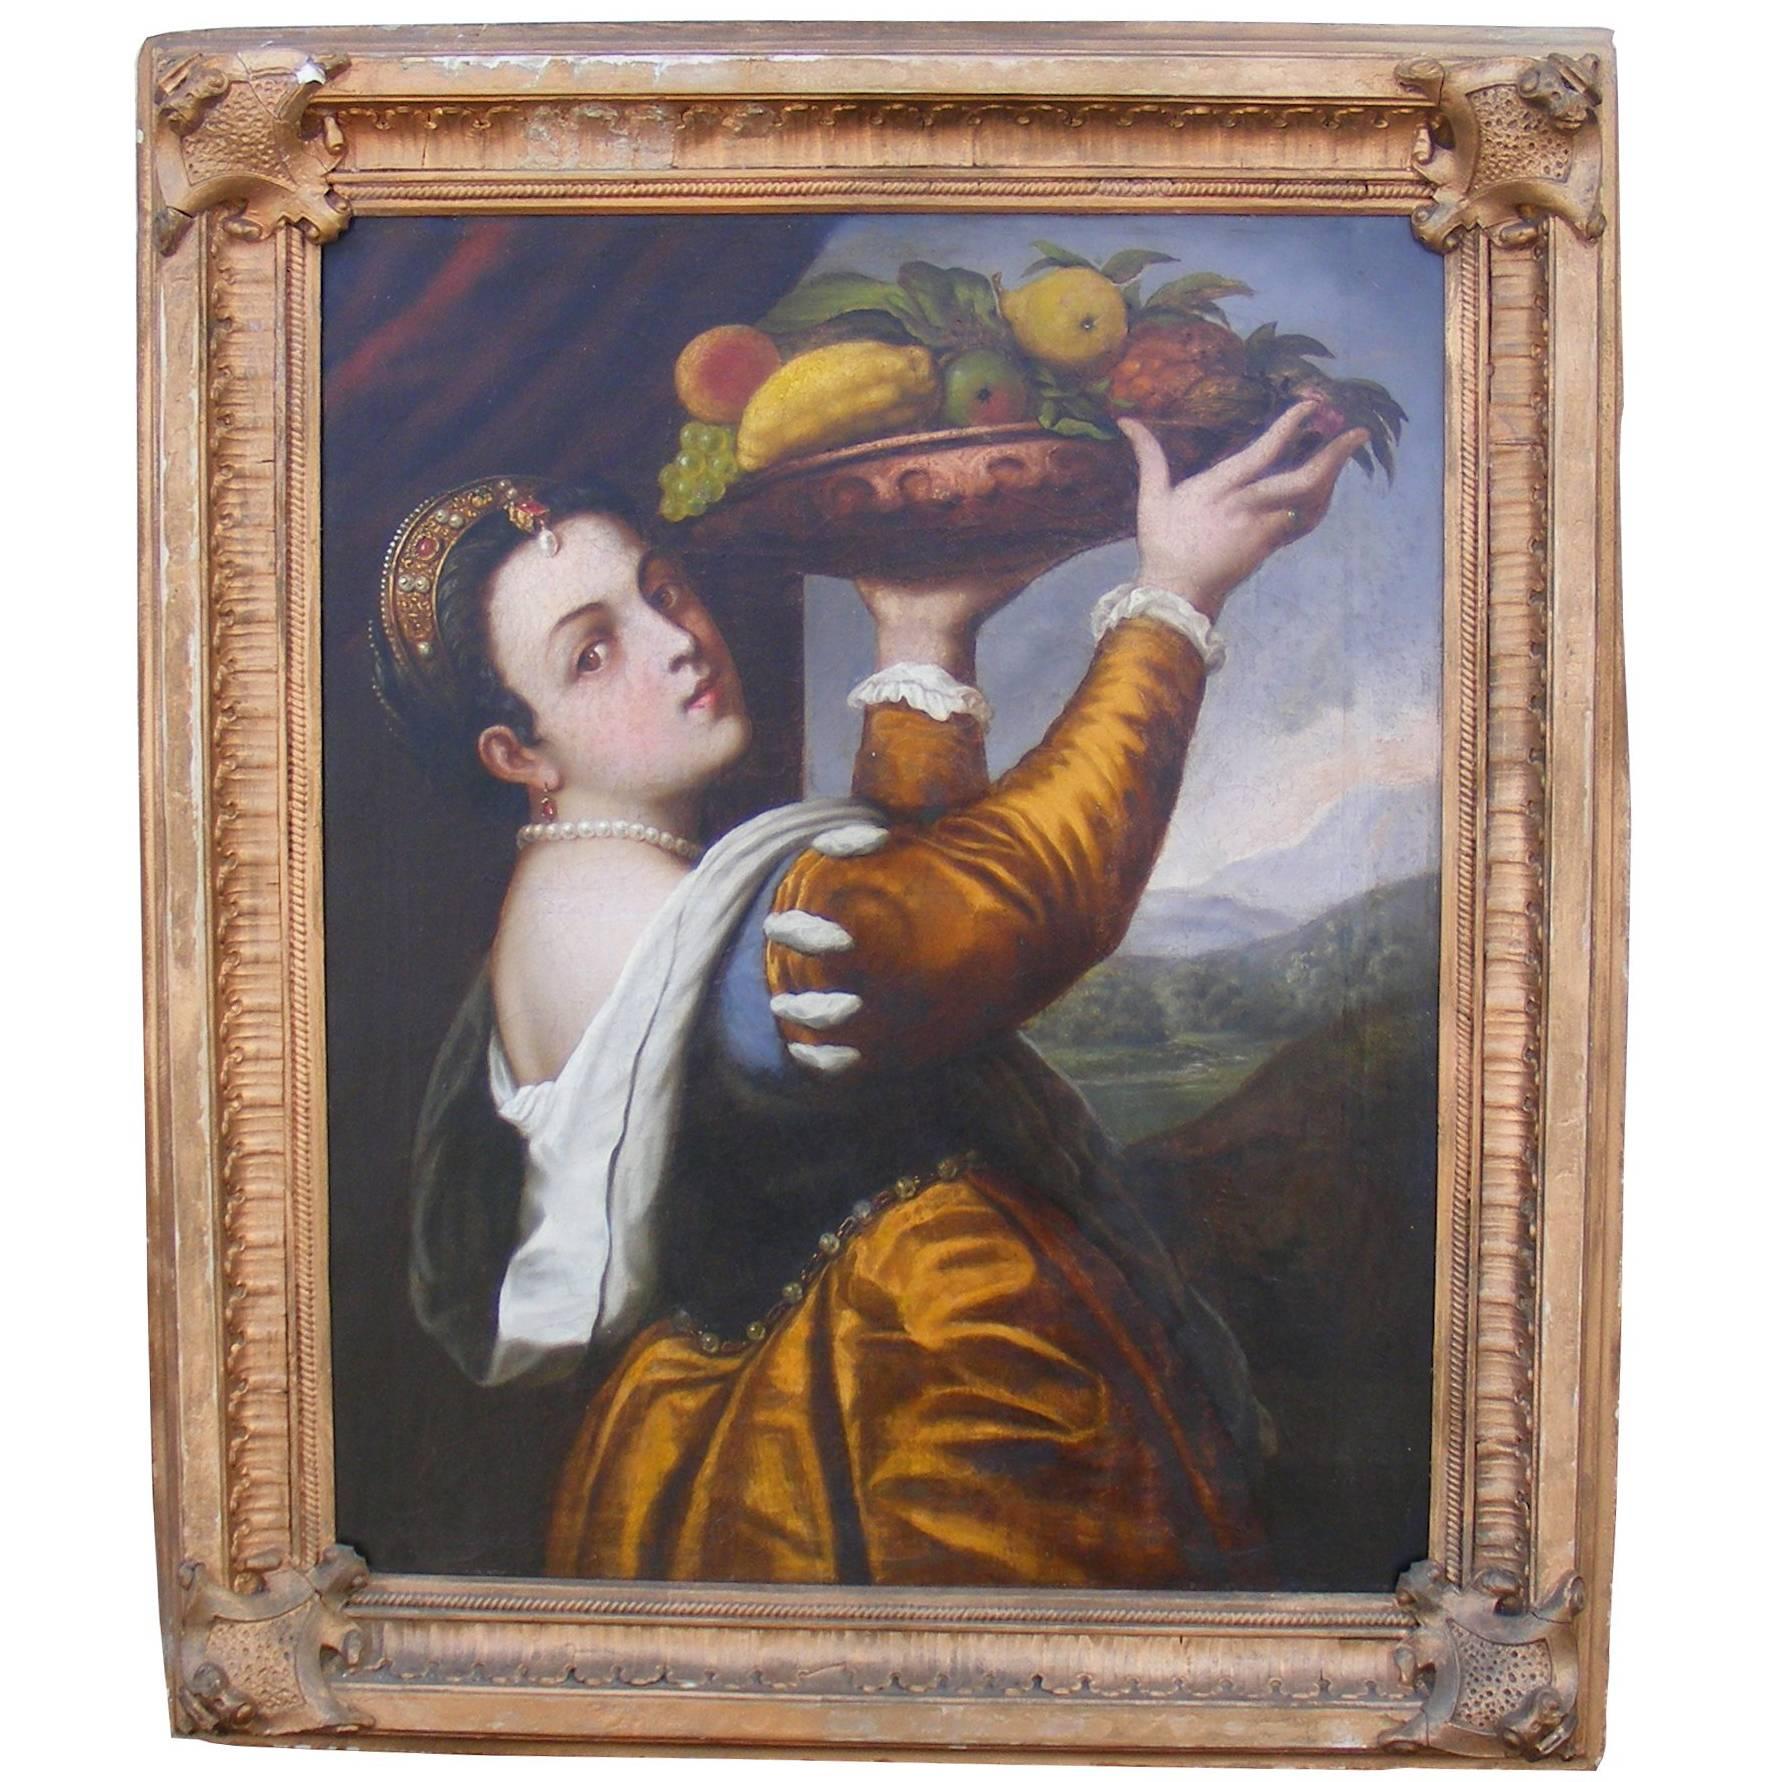 Antique Oil on Canvas Painting Depicting Titians Daughter, Carl De Calzada, 1866 For Sale